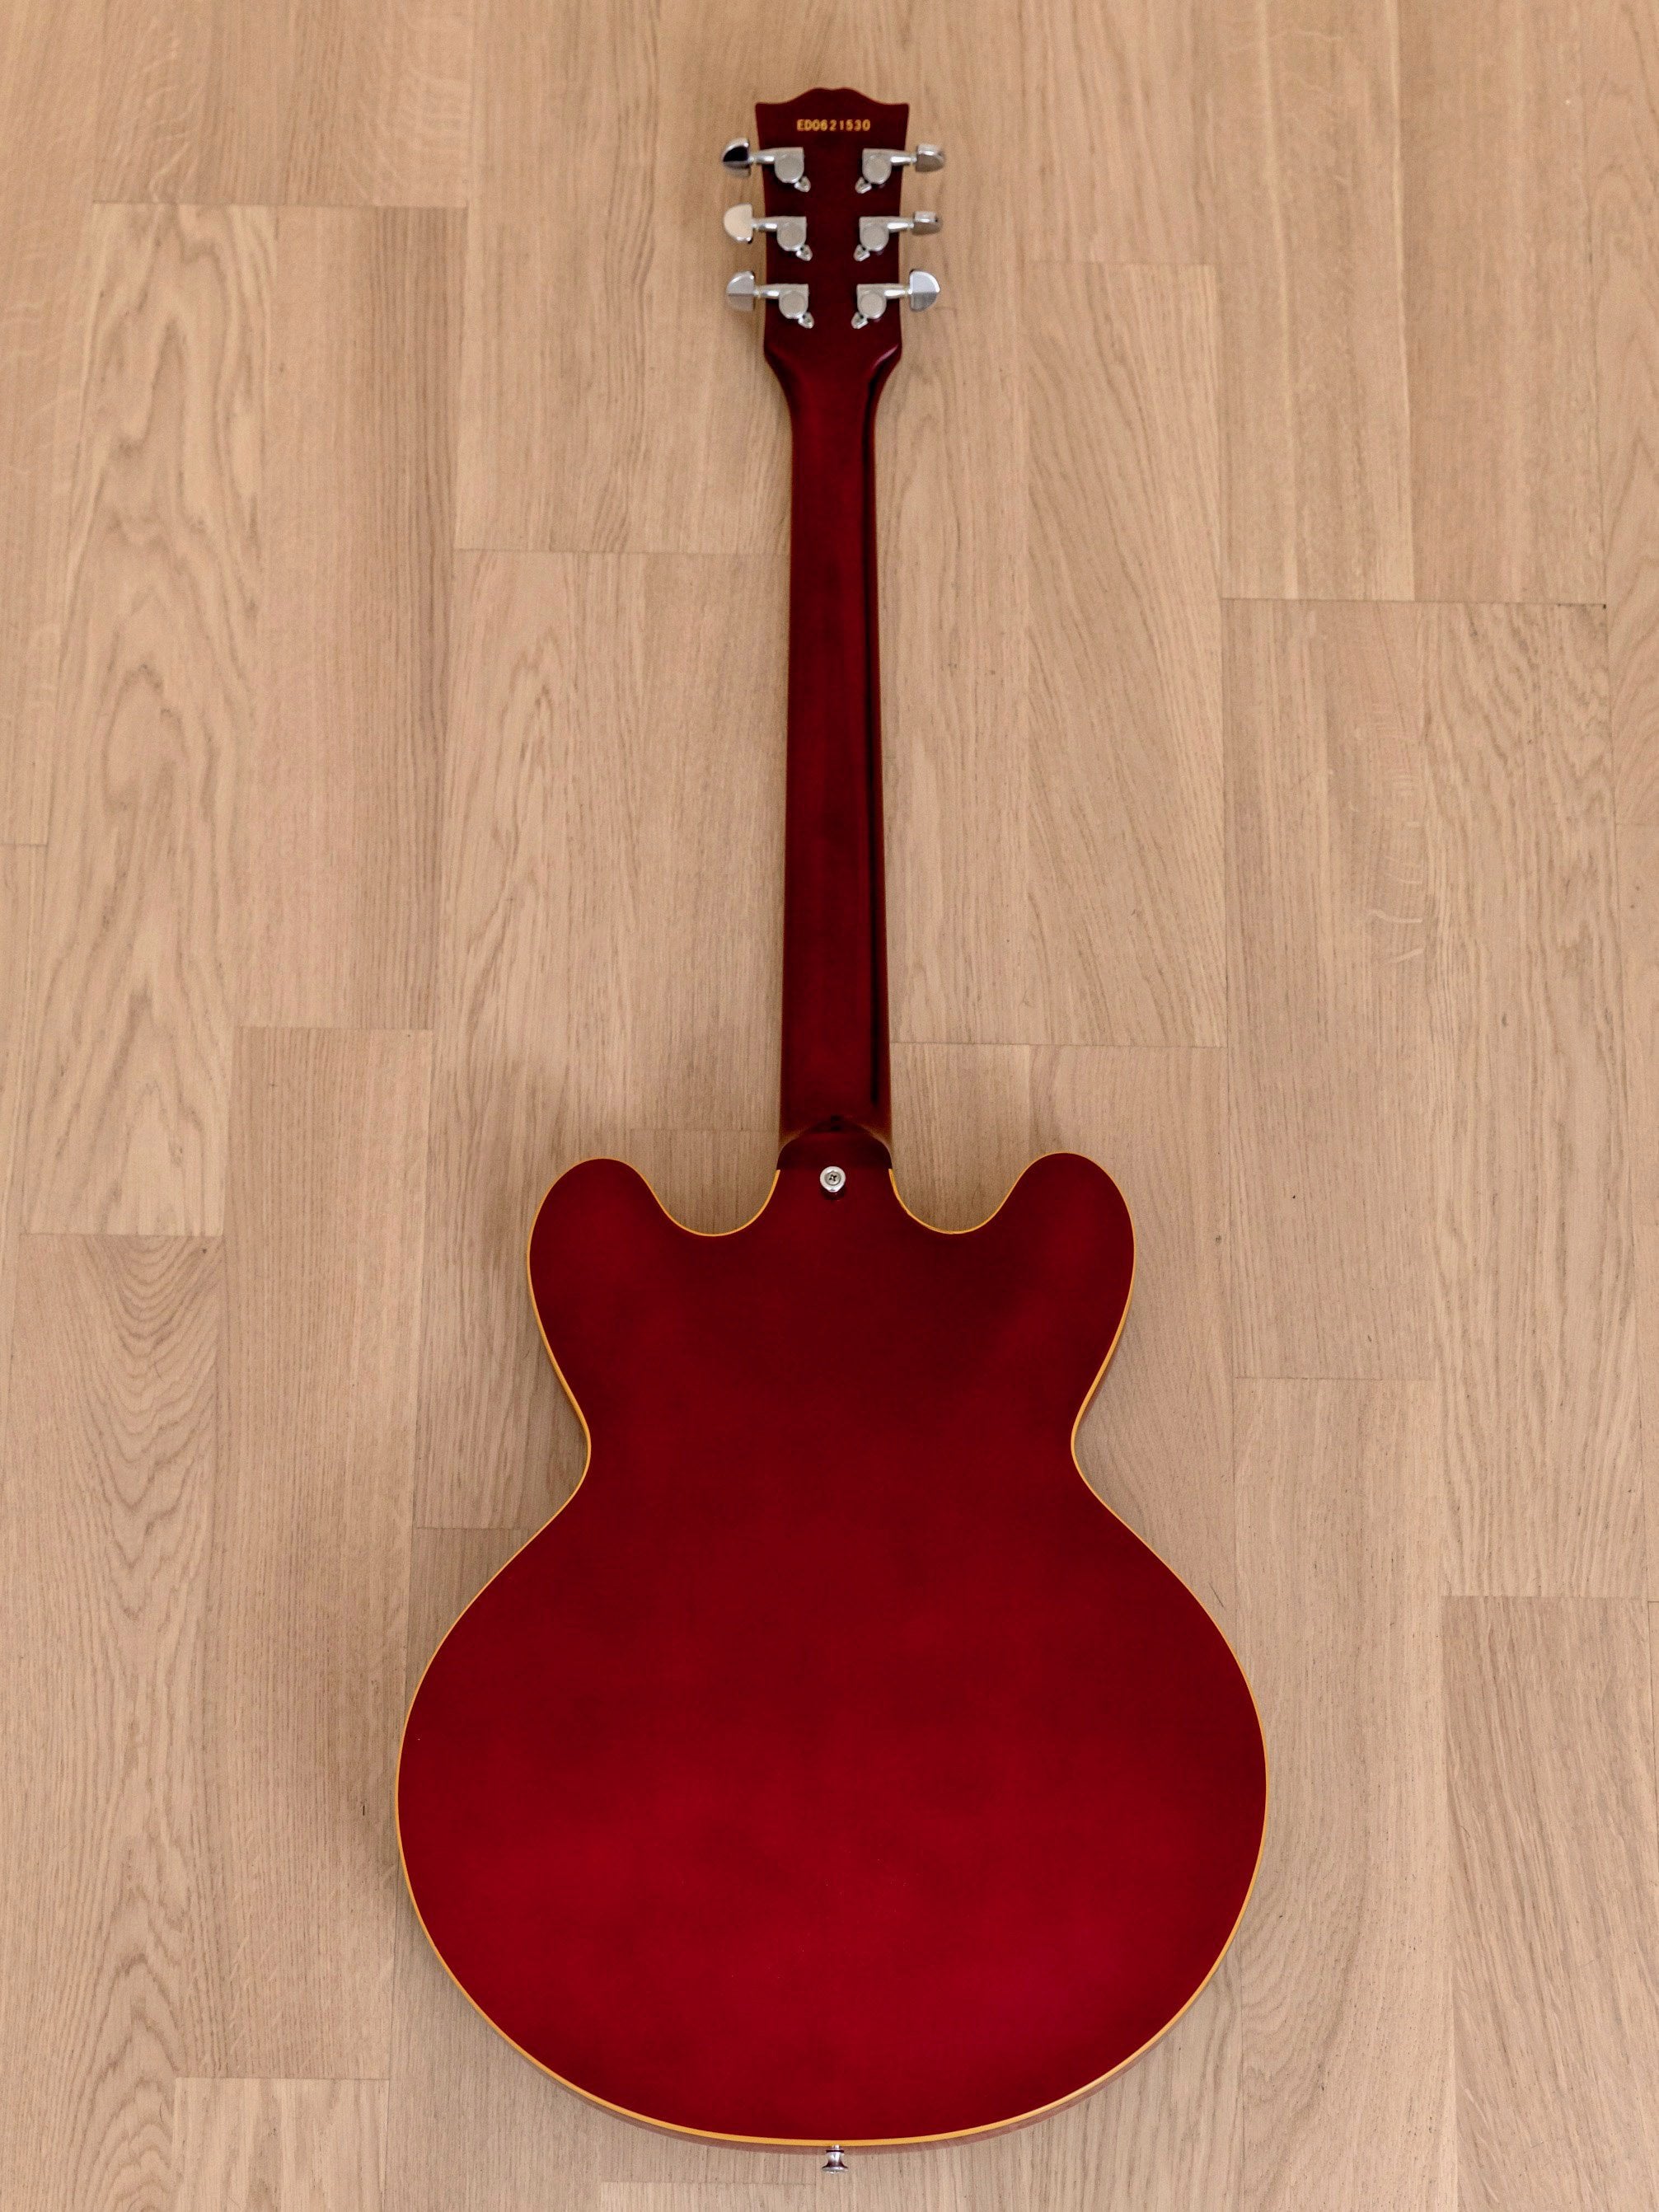 2006 ESP Edwards E-SA-118LT Carved Top 335 w/ 50s Neck, Cherry Lacquer Finish w/ Case & USA Duncan Pickups, Japan